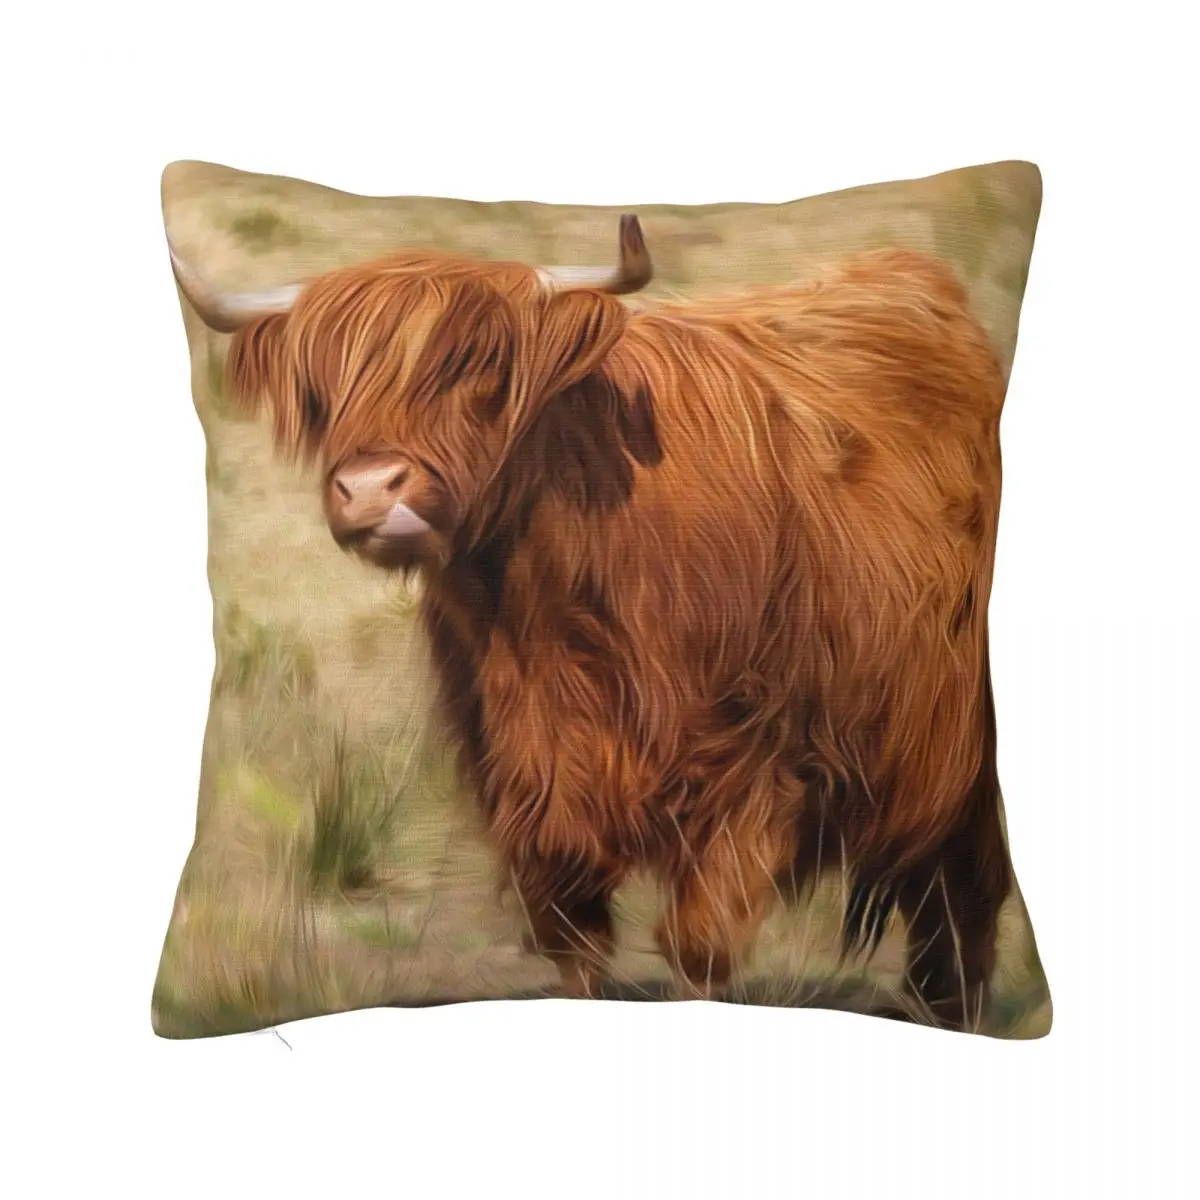 Scottish Highland Cow Pillowcase Polyester Cushion Cover Natural Western Wildlife Animal Cattle Throw Pillow Case Cover 45X45cm